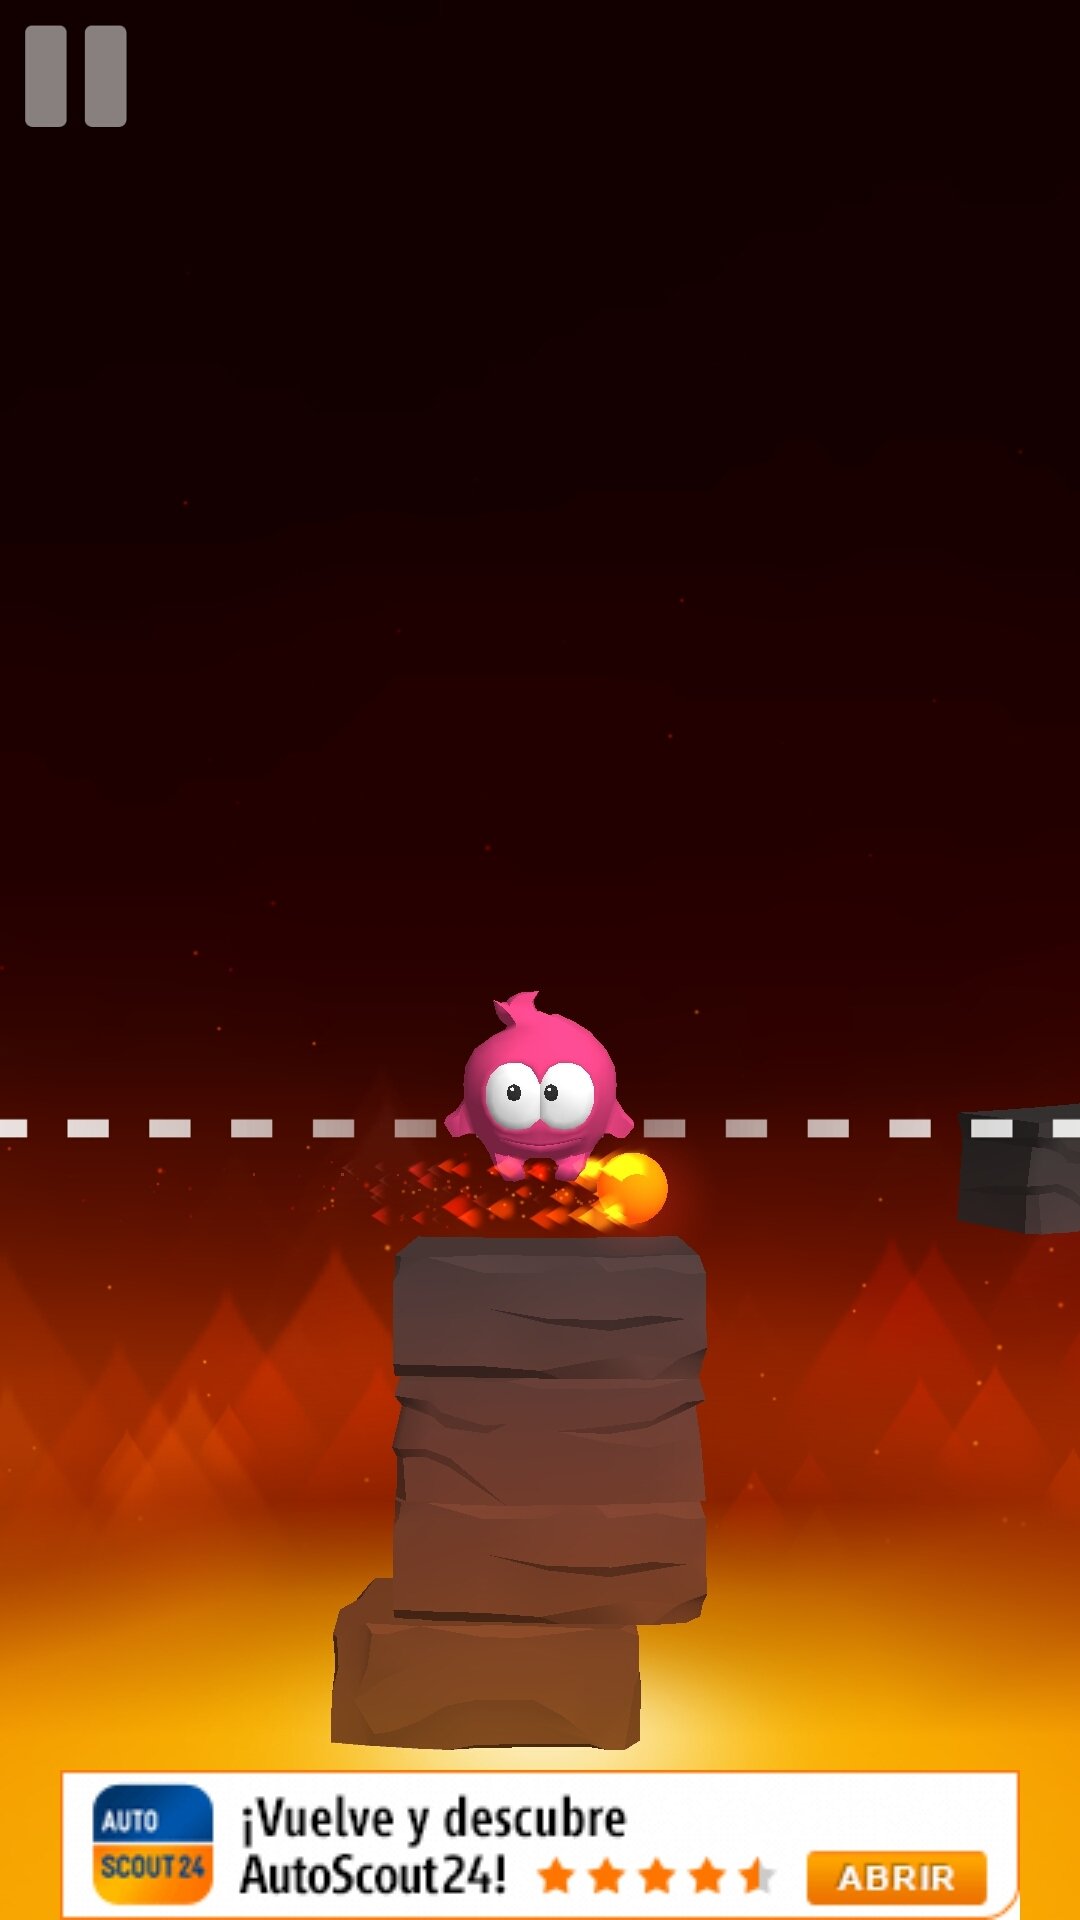 Stack Jump 1.4.9 Download for Android APK Free